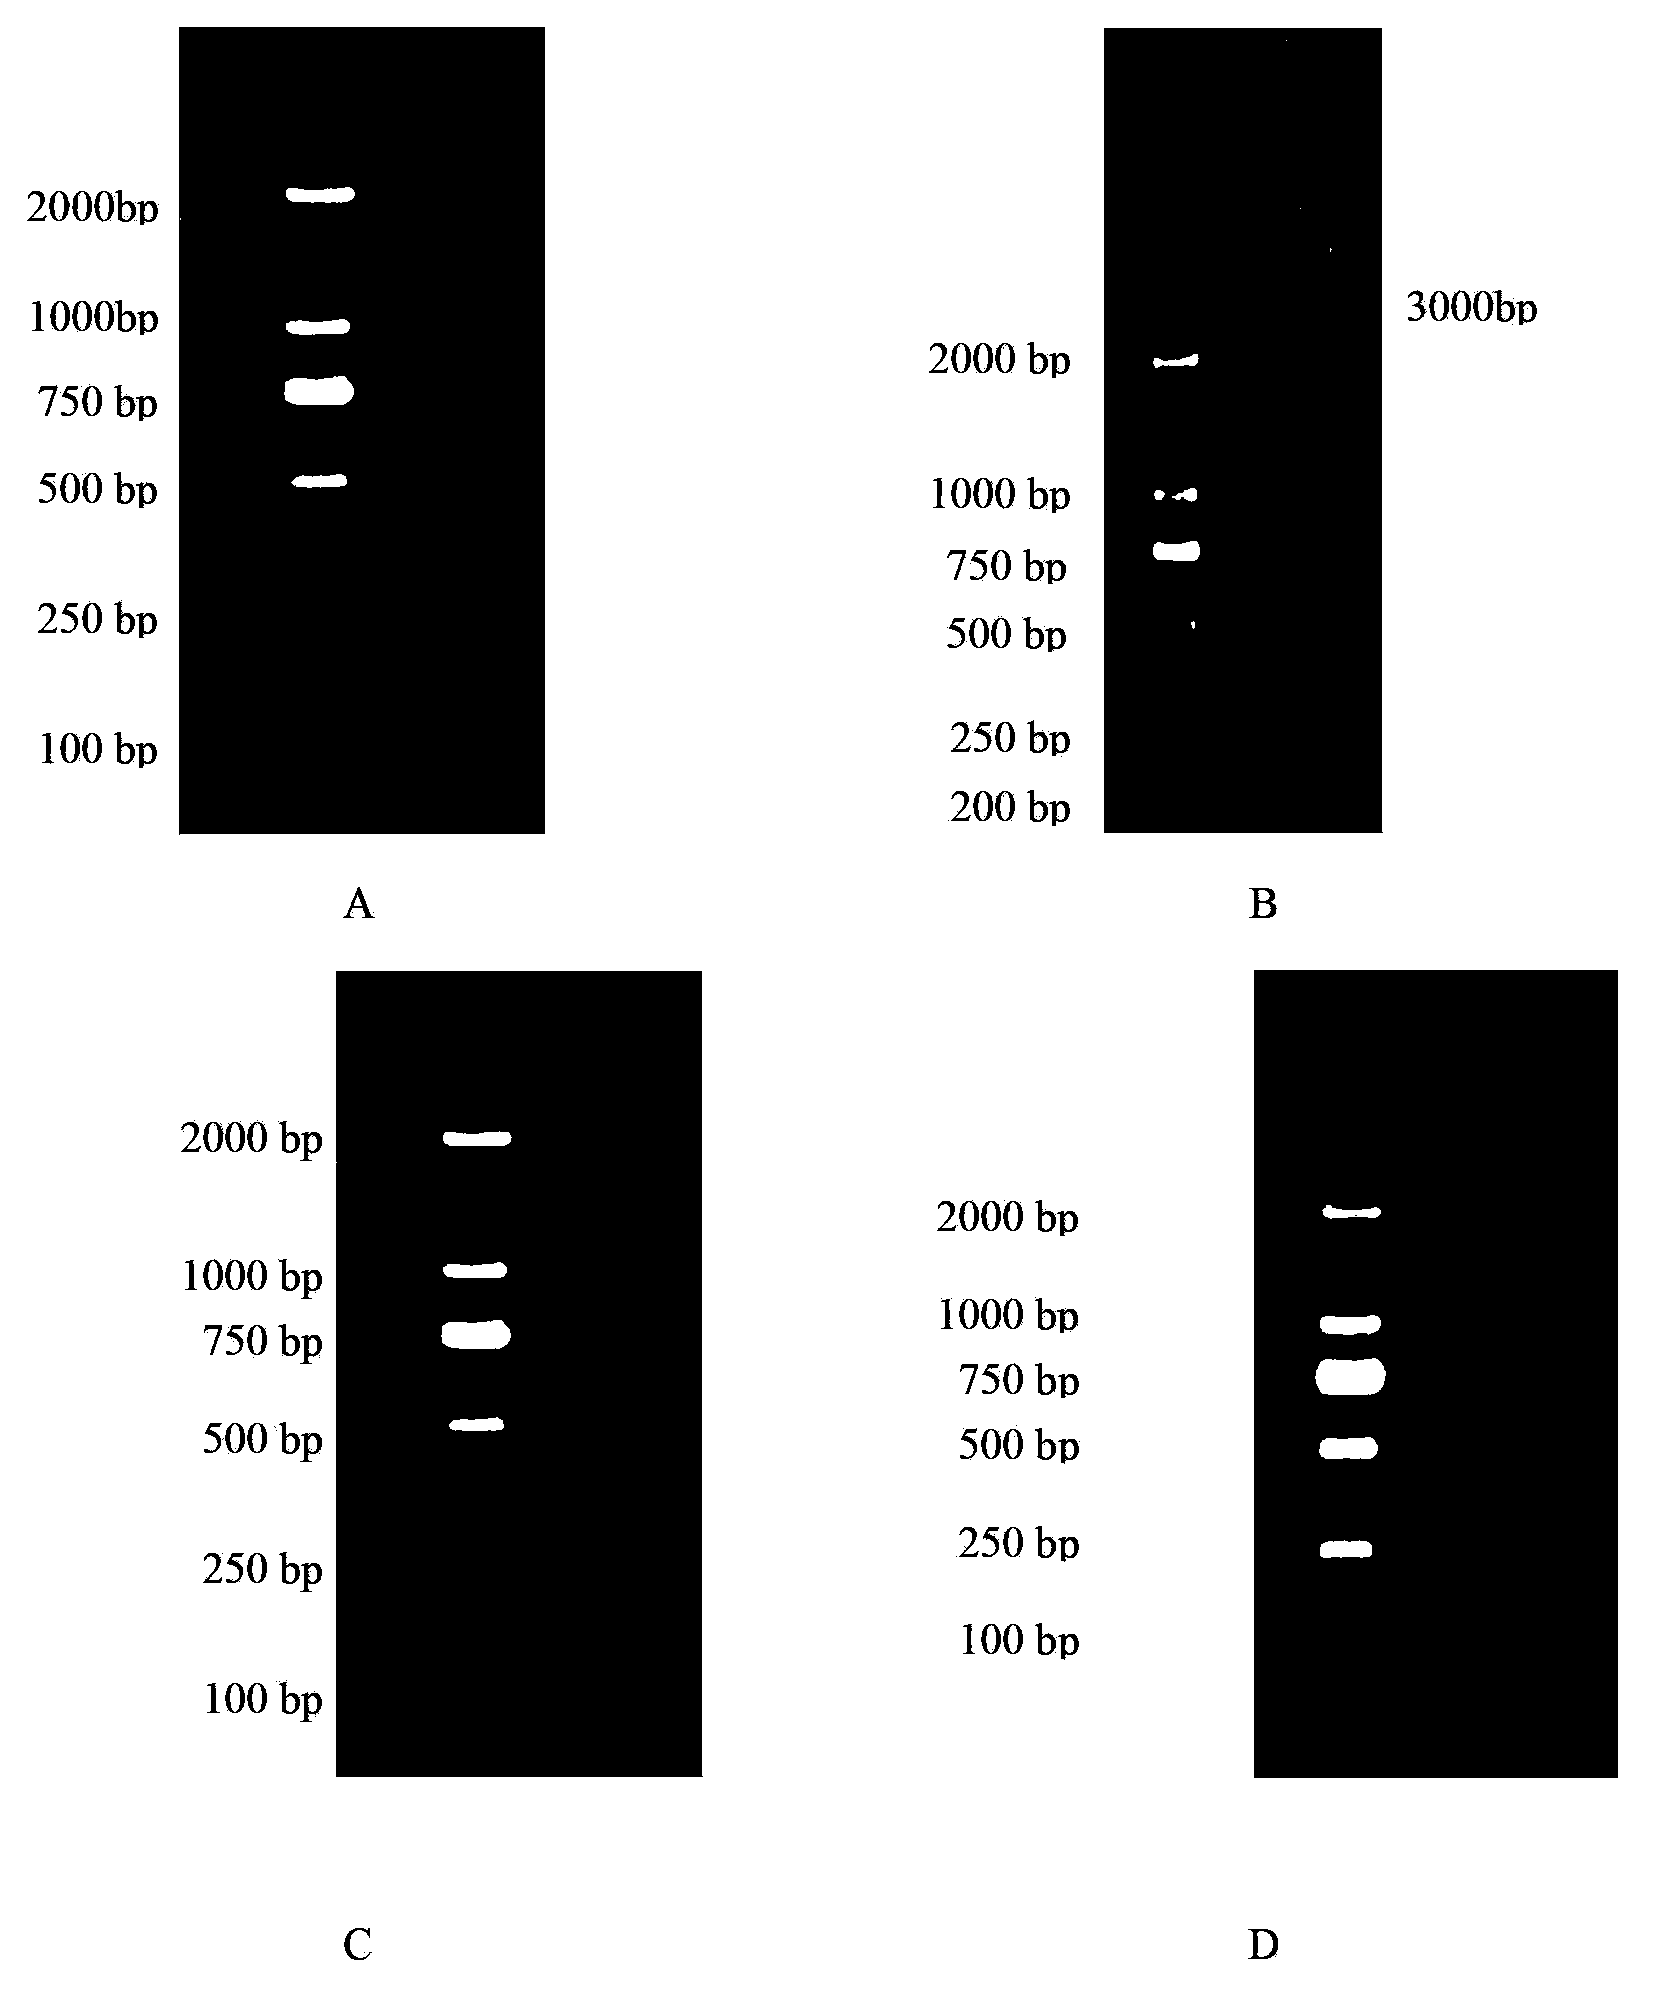 Library versus library yeast two-hybrid massive interaction protein screening method